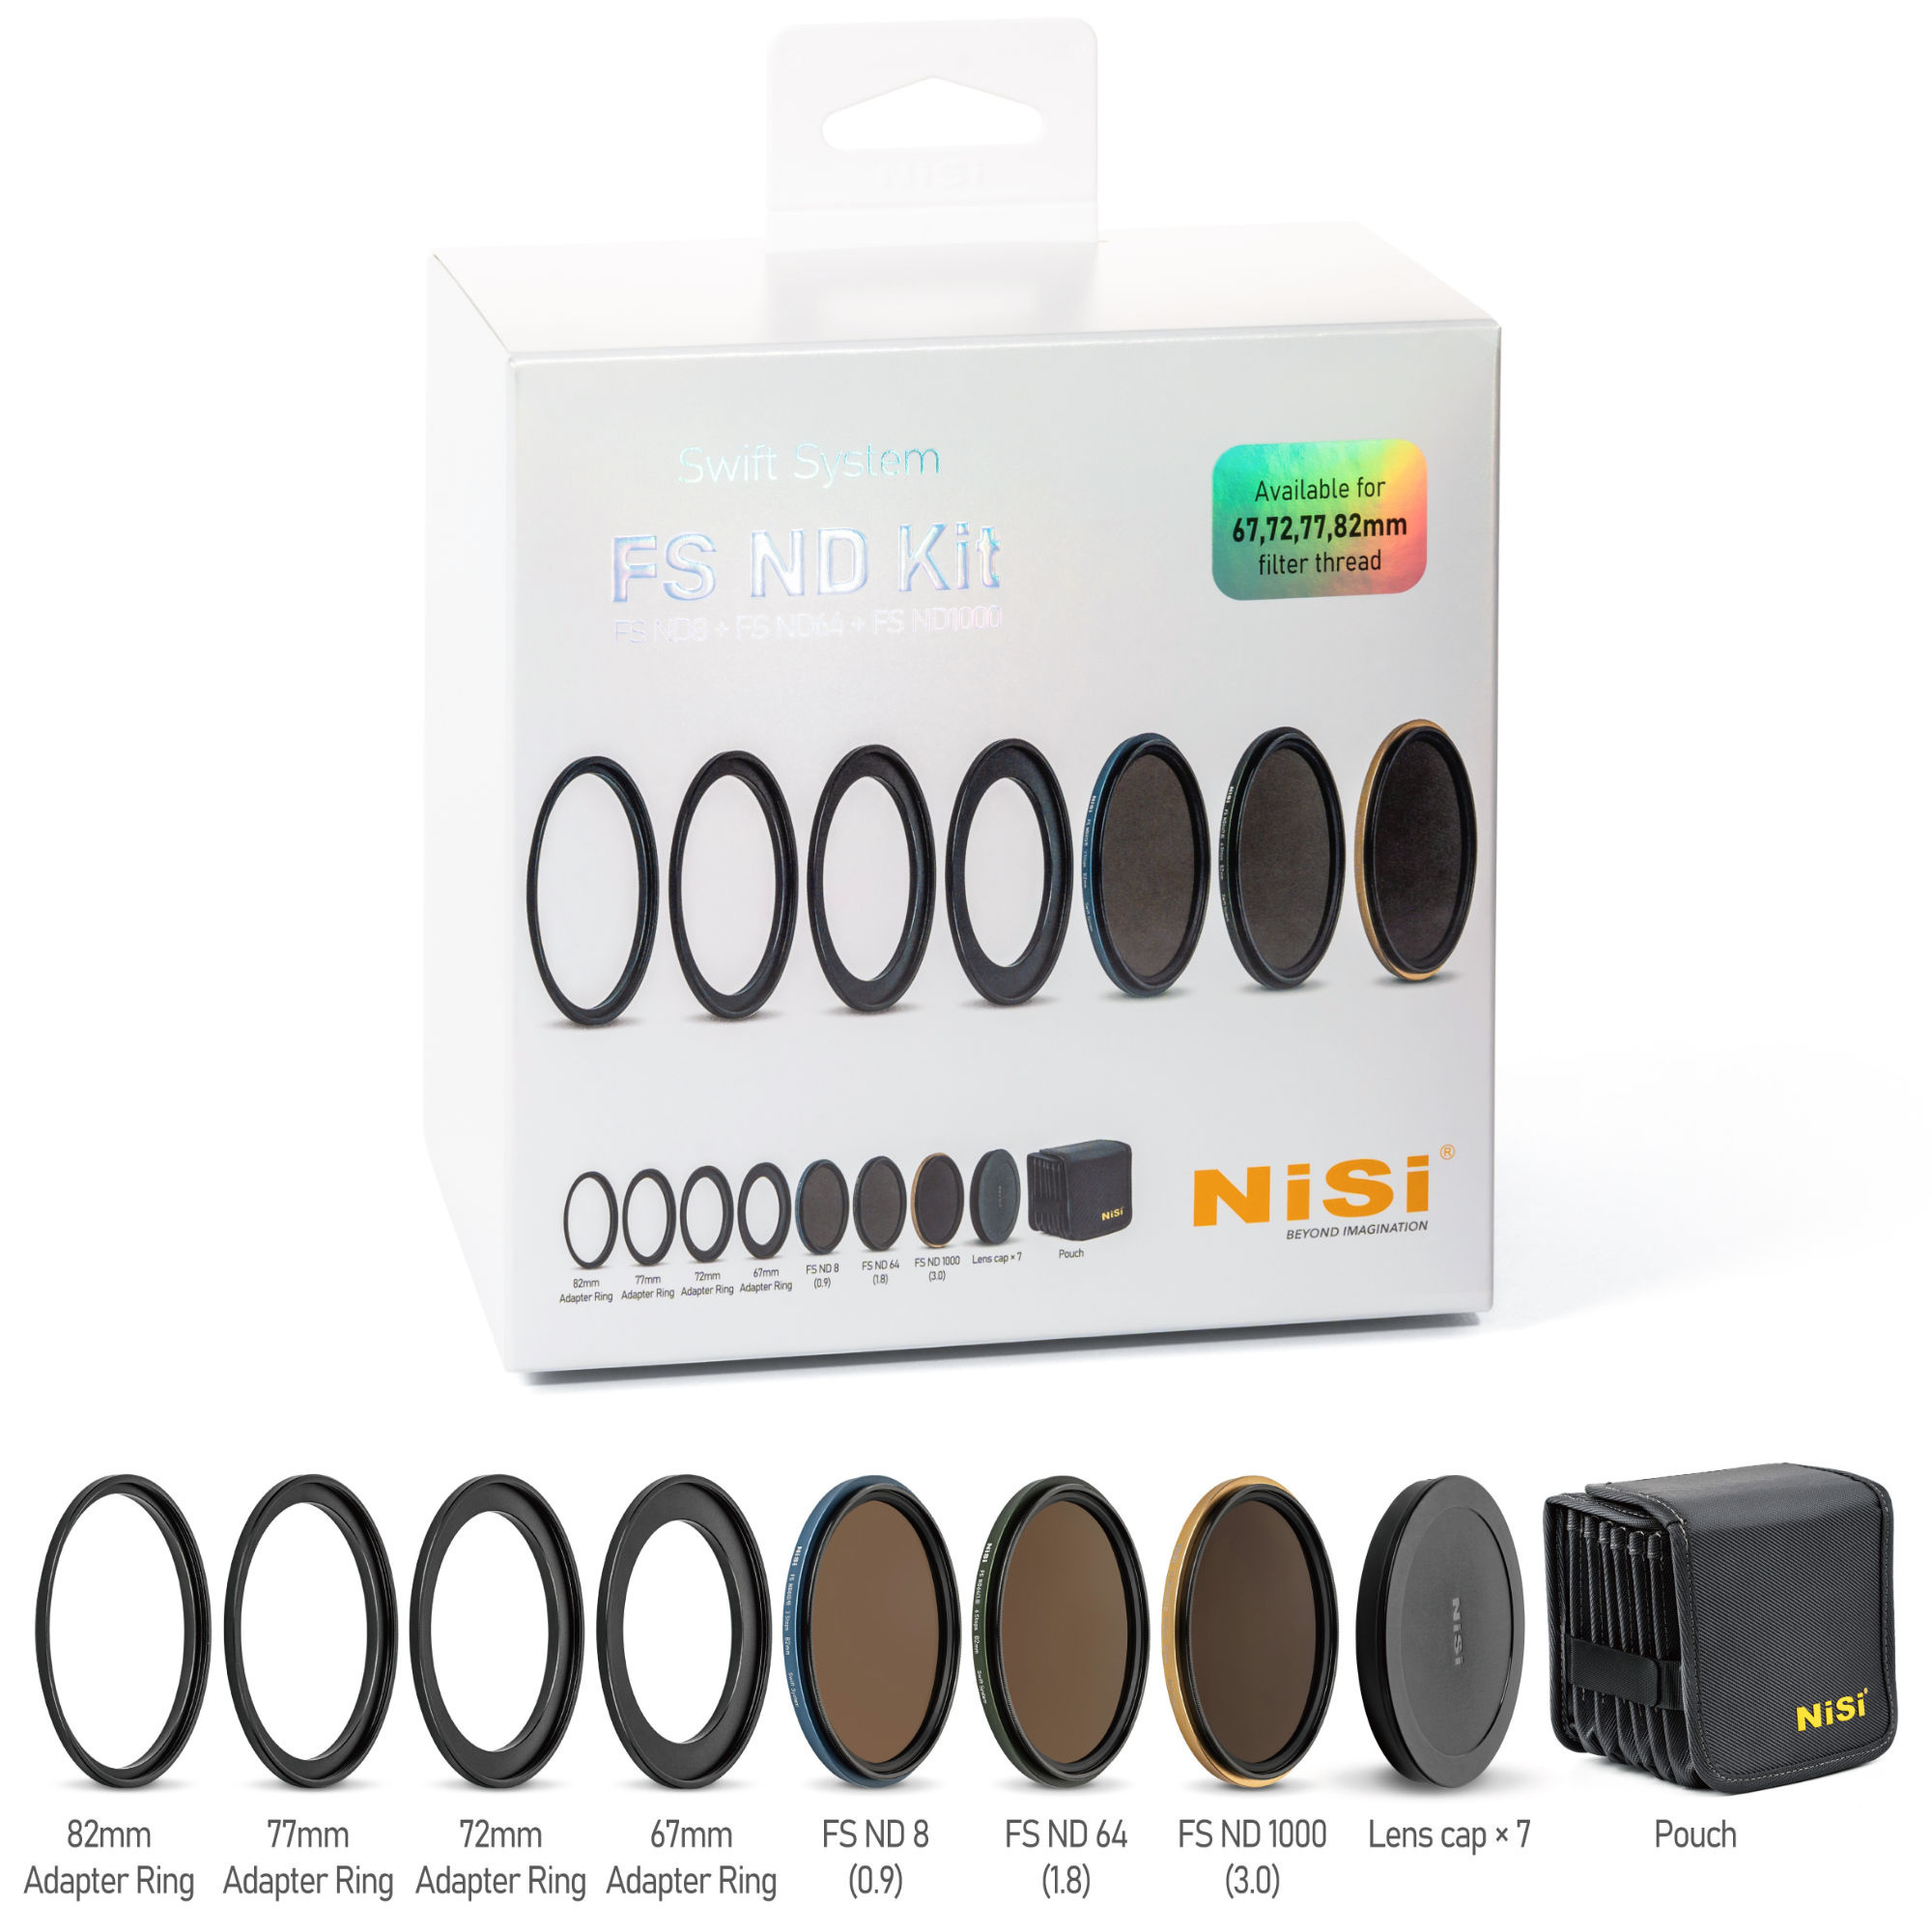 NiSi SWIFT FS ND Filter Kit for 67-82mm Filter Threads (ND8, ND64, ND1000)